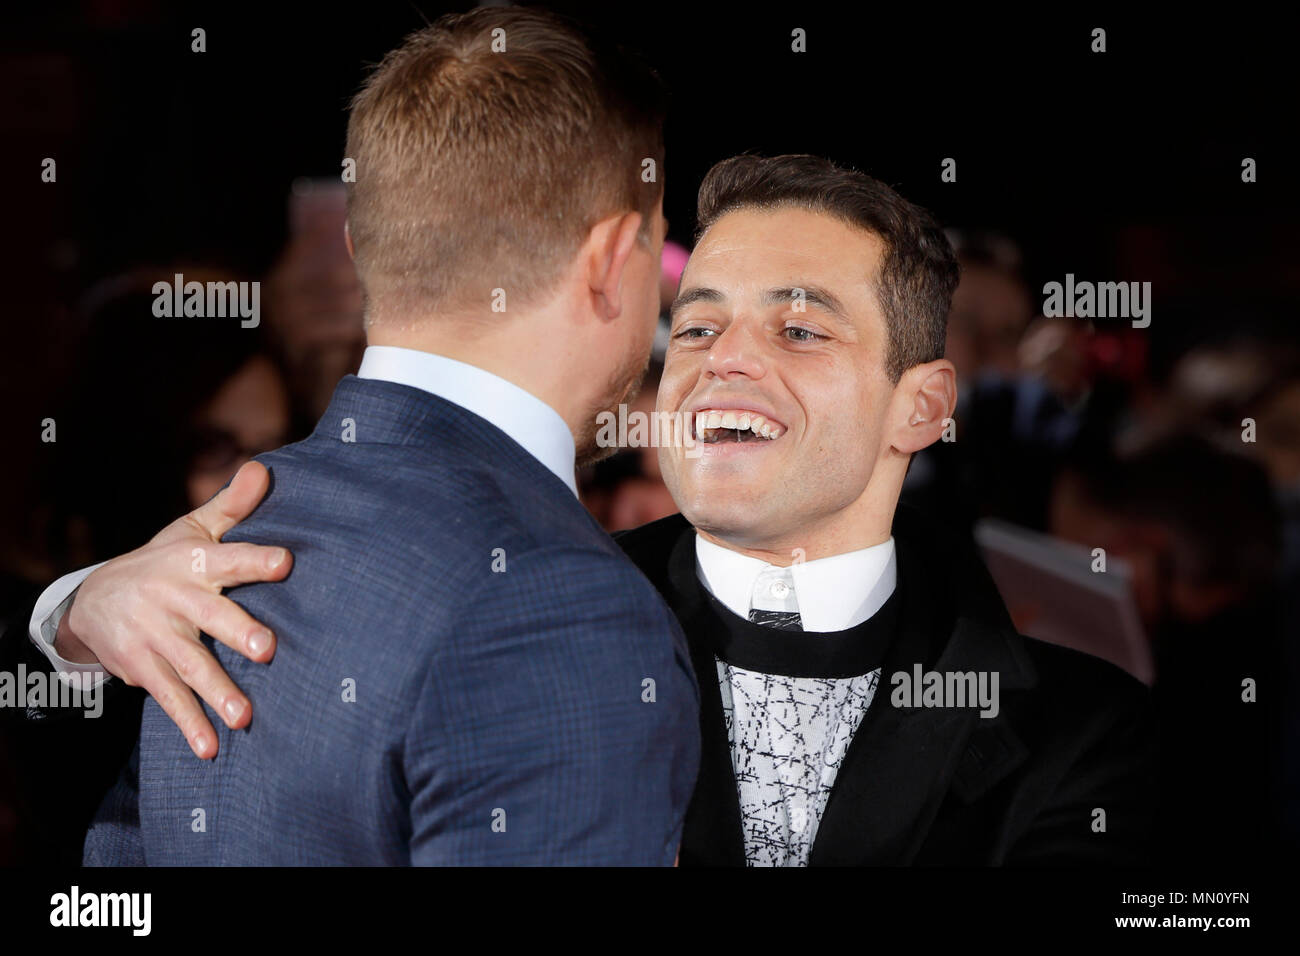 LONDON, ENGLAND - FEBRUARY 16: Rami Malek embraces Charlie Hunnam at The  Lost City of Z UK premiere on February 16, 2017 in London, United Kingdom  Stock Photo - Alamy